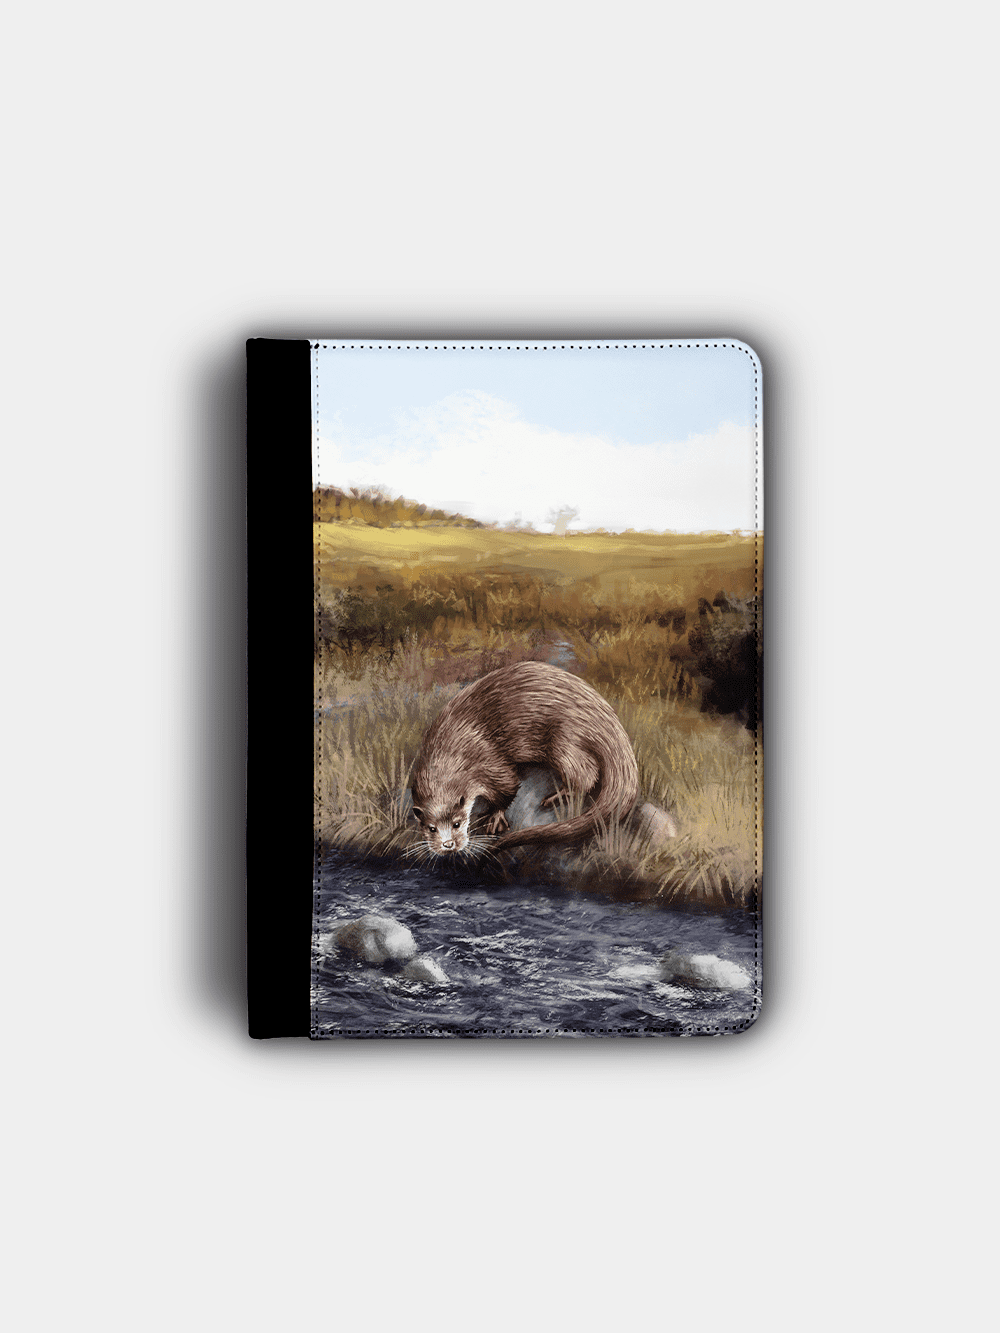 Country Images Personalised Custom Customised Flip iPad Cover Case Scotland Scottish Highlands Otter Otters Gift Gifts